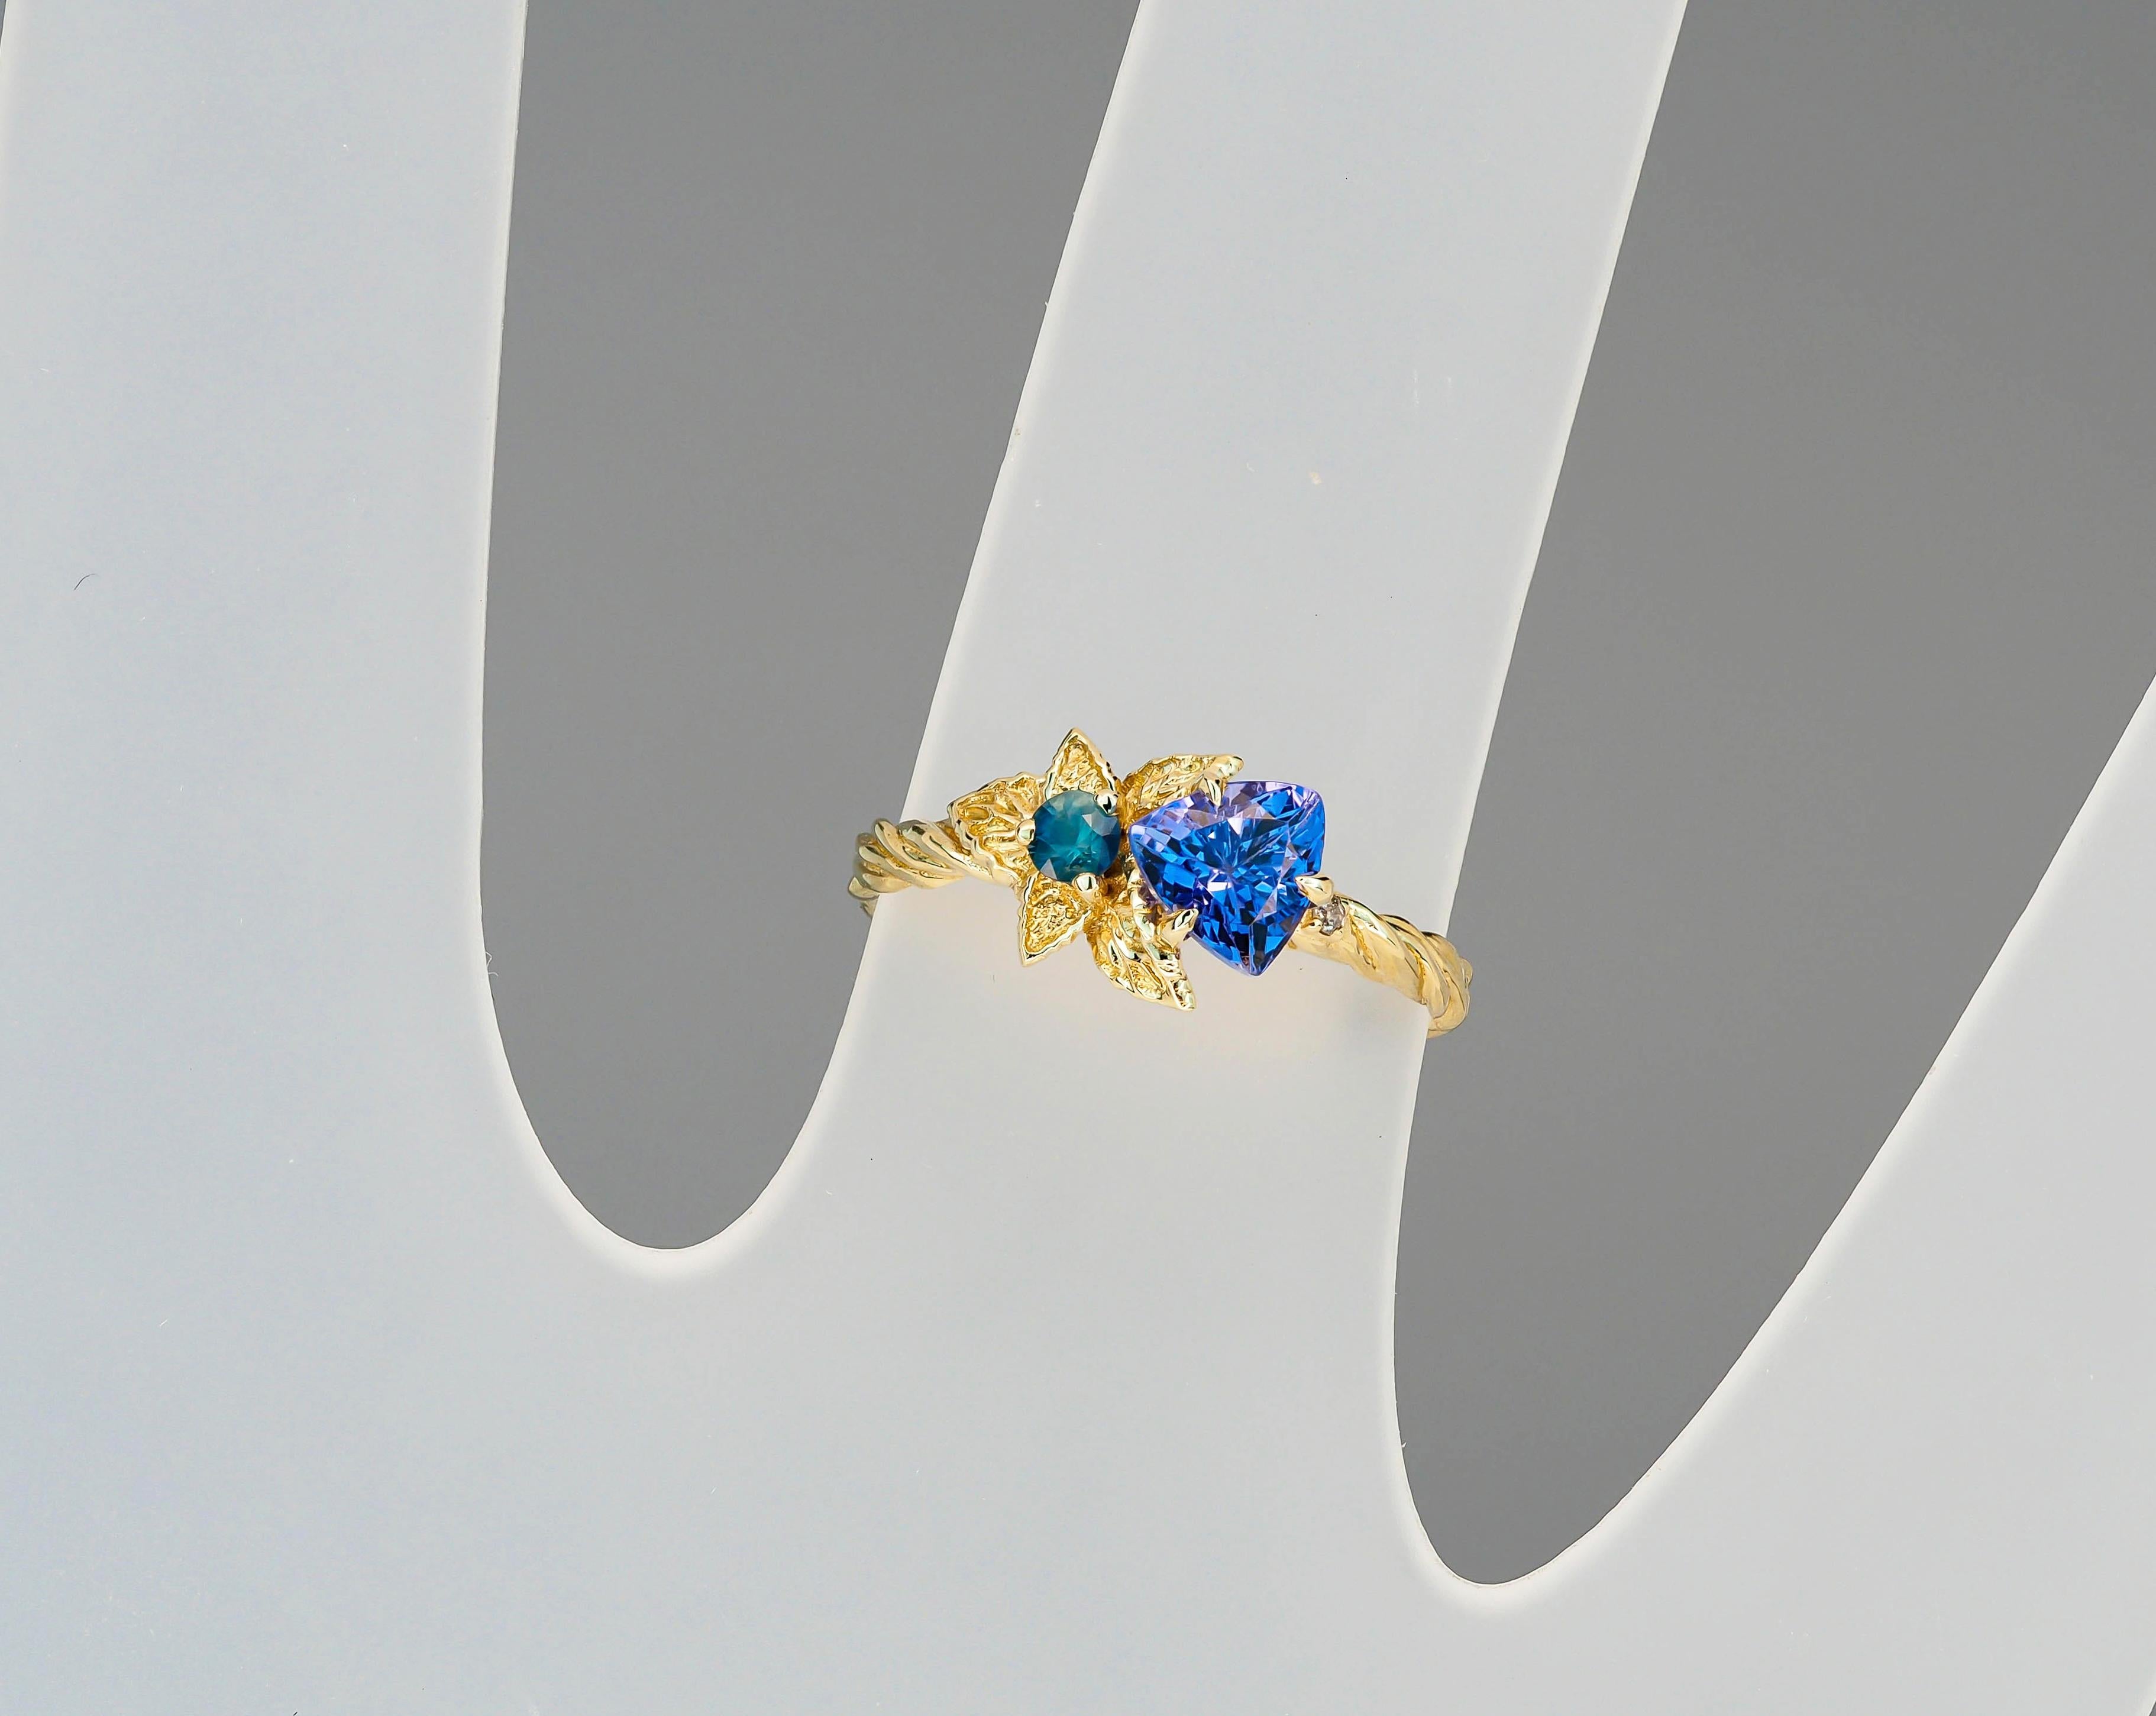 For Sale:  Tanzanite and diamonds 14k gold ring. Flower design ring with tanzanite. 14